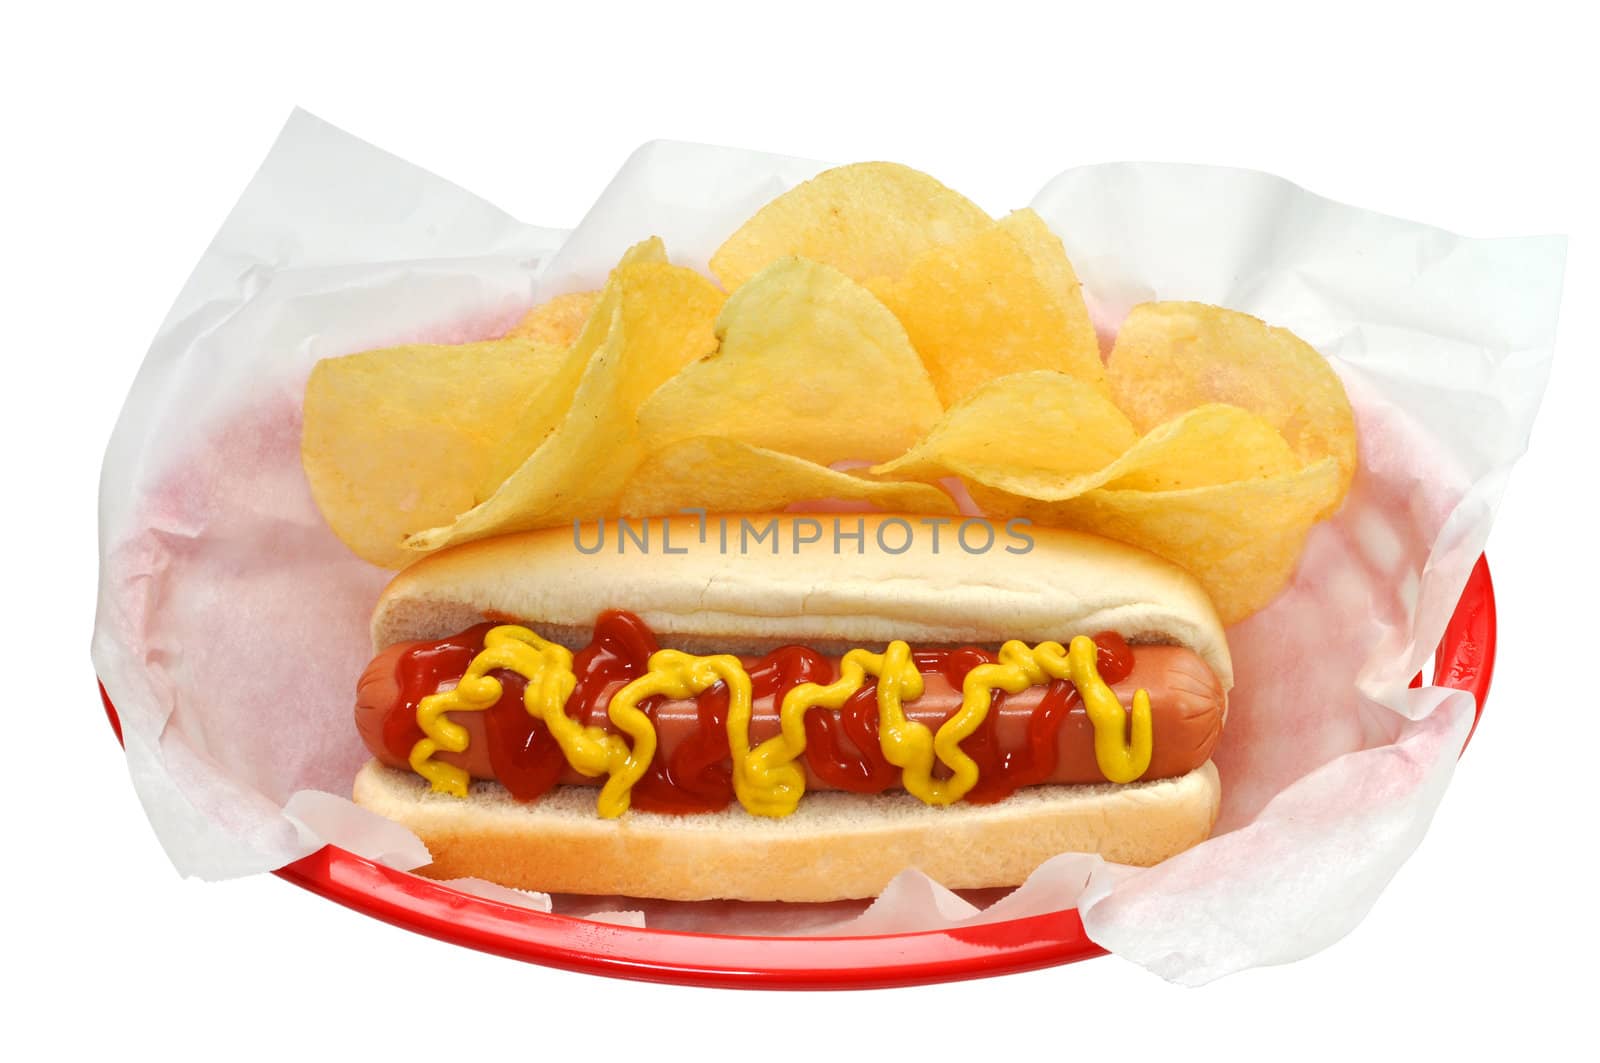 Hot dog and potato chips in basket.  Isolated on white background with clipping path.